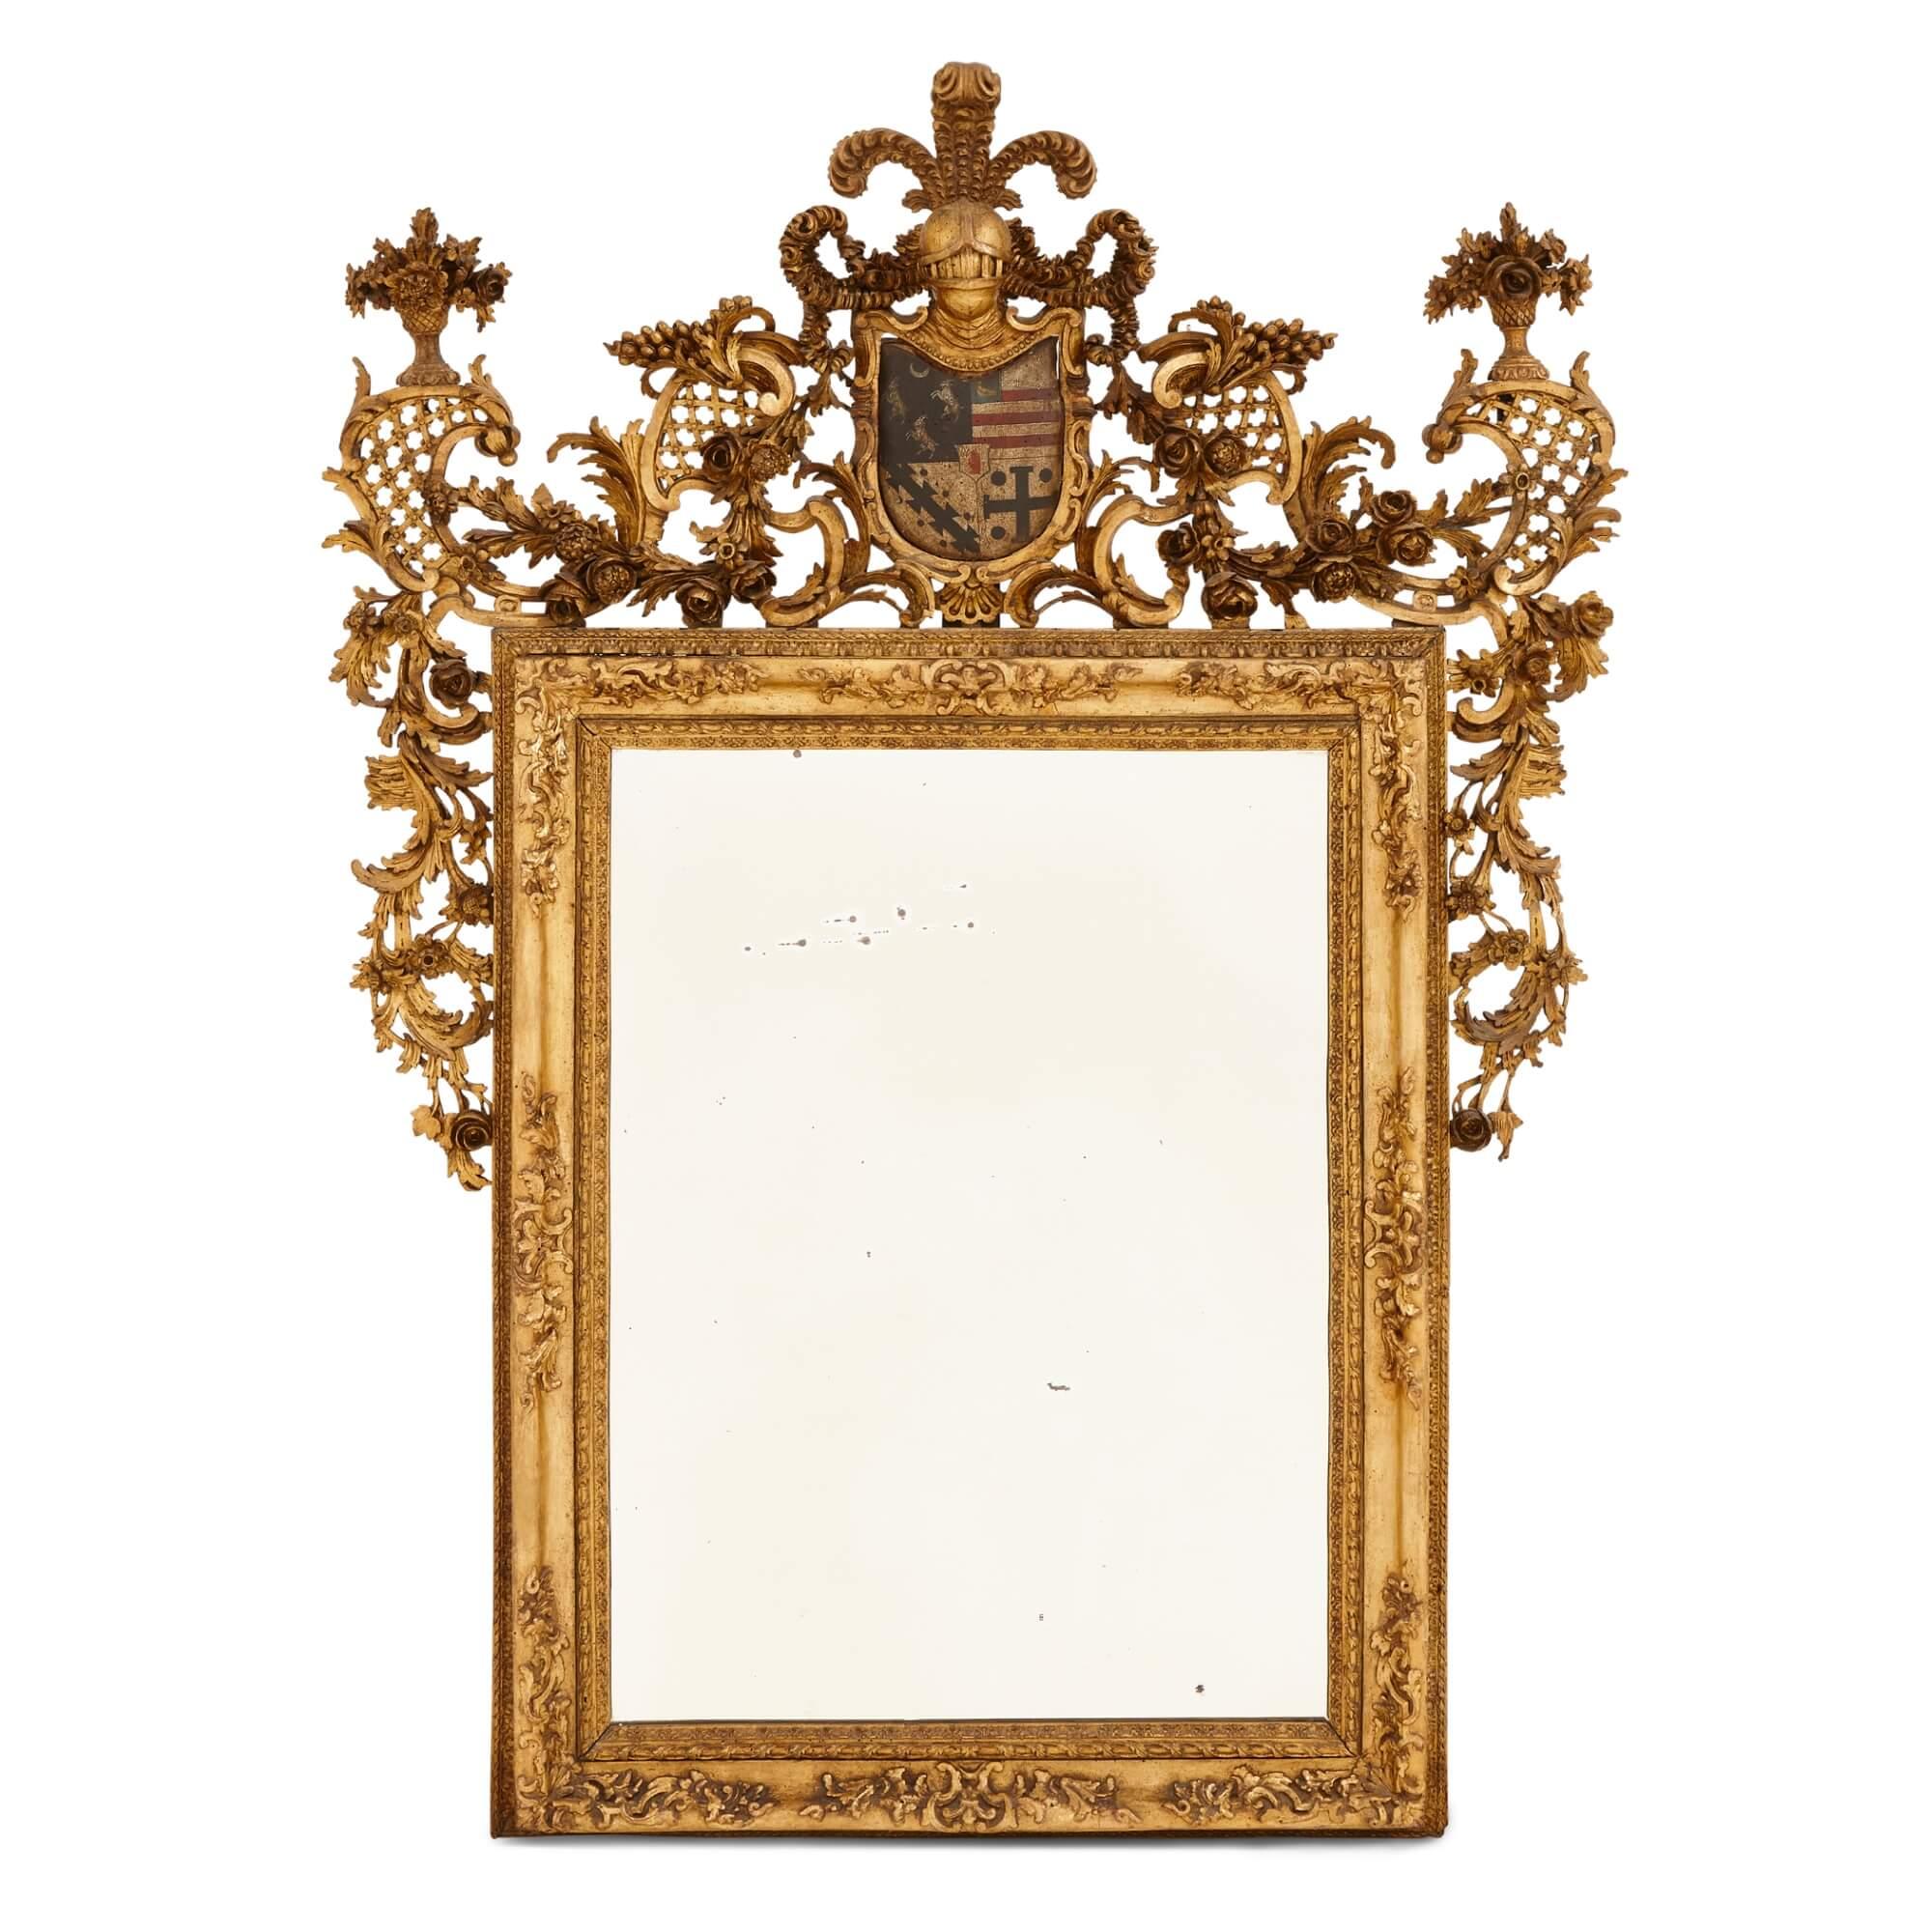 A pair of giltwood and polychrome-decorated antique Italian mirrors
Italian, Mid-18th Century
Height 154cm, width 115cm, depth 8cm

Dating from Italy in the mid-18th century, these exceptional and rare mirrors are made from giltwood and feature